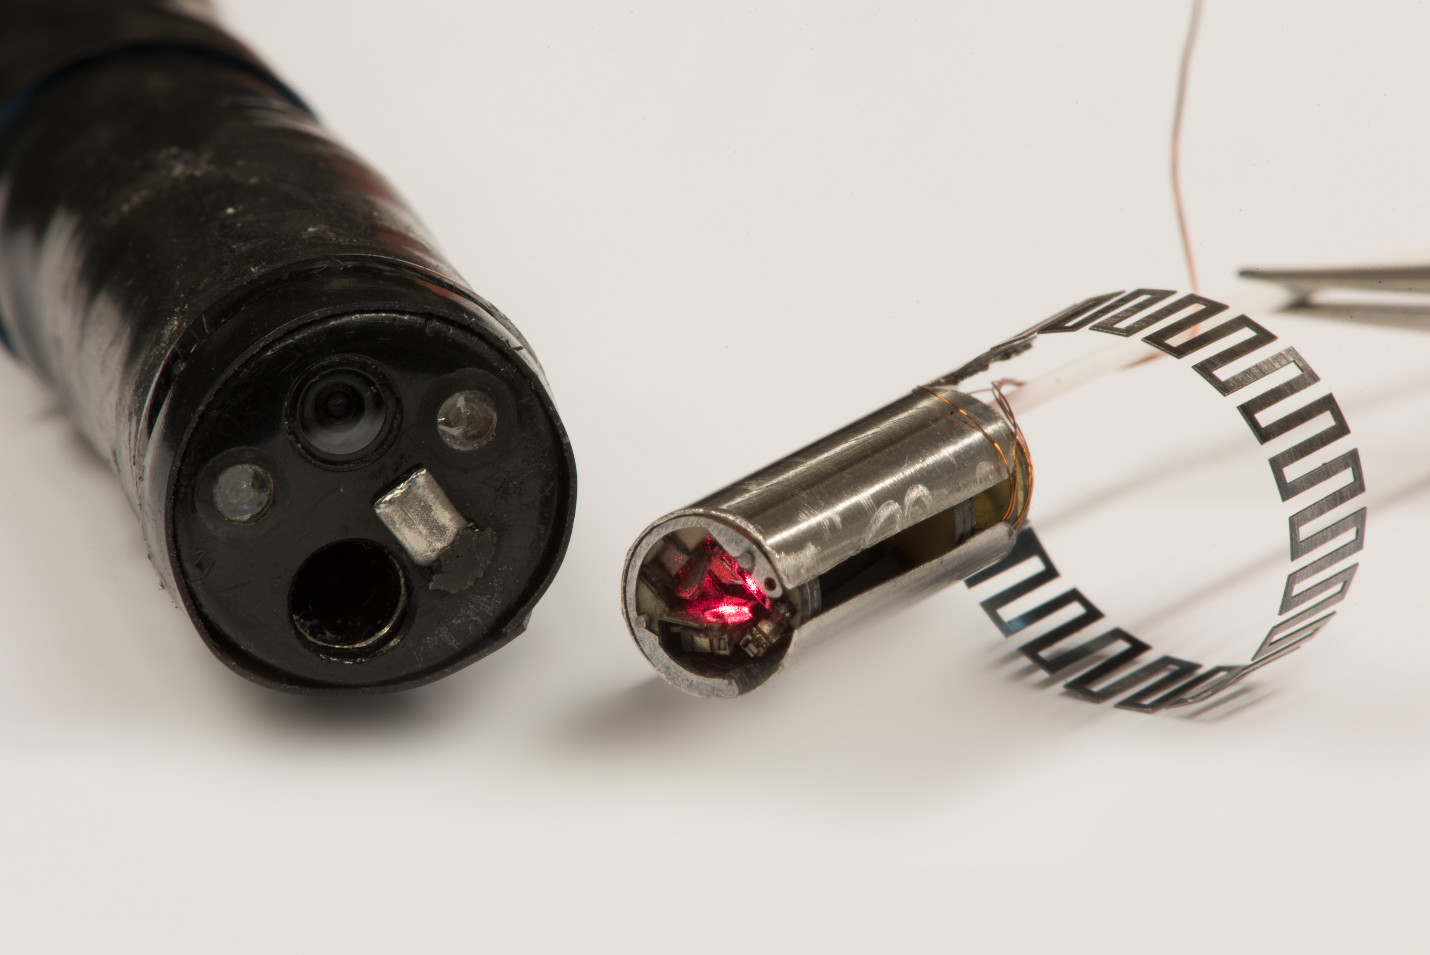 An endoscope with laser as end-effector